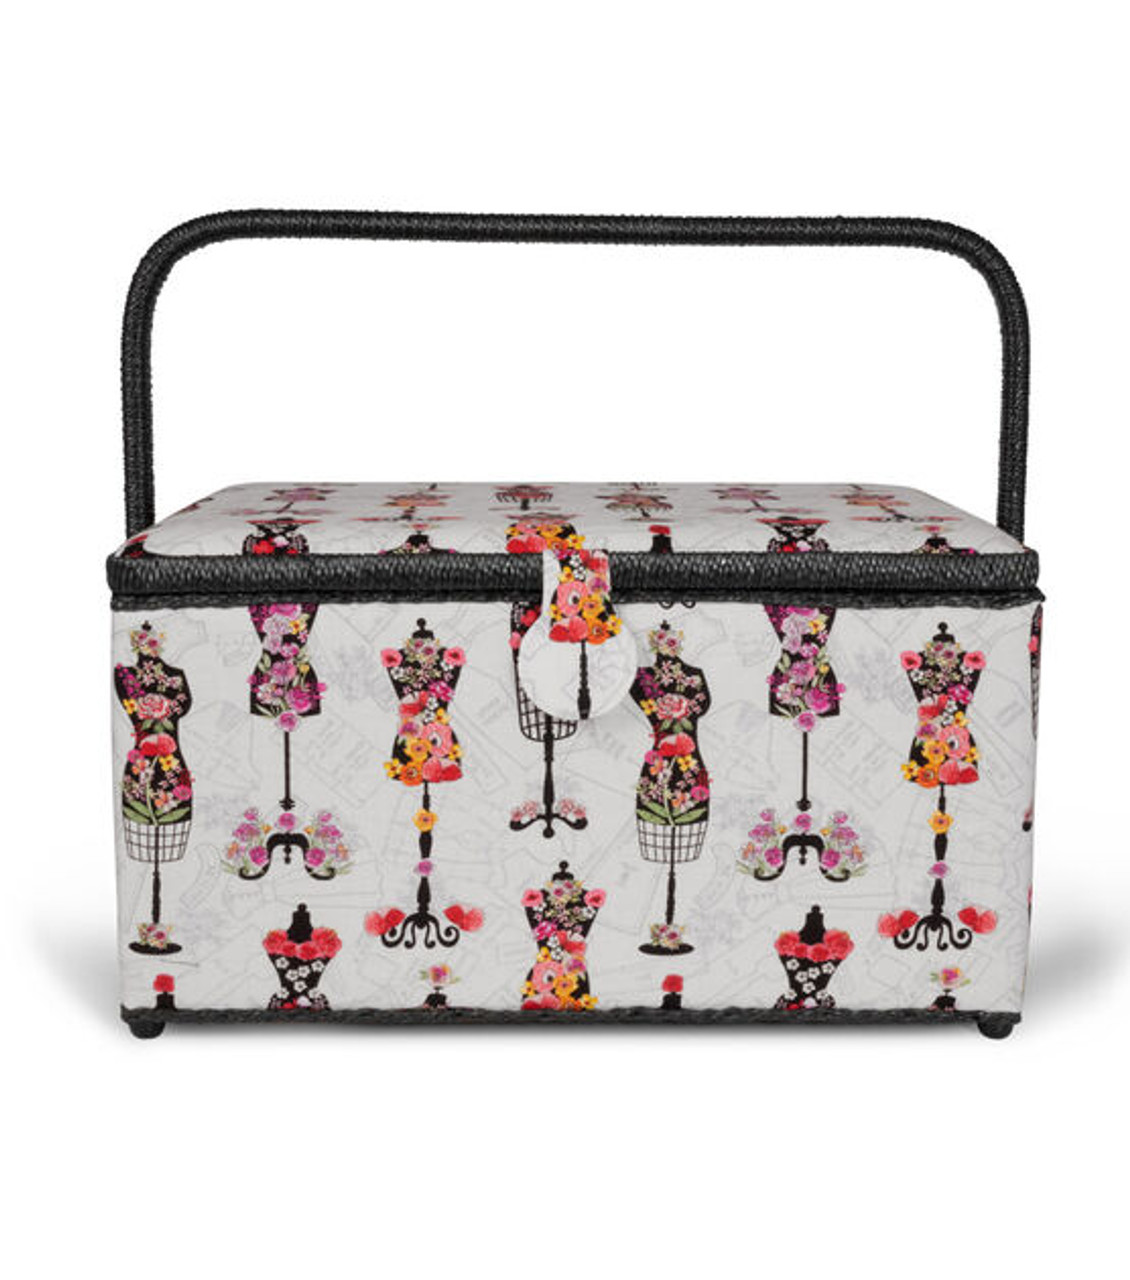 https://cdn11.bigcommerce.com/s-866uh5lpmm/images/stencil/1280x1280/products/2587/3351/XLarge_Rectangle_Sewing_Basket_-_Dress_Form_4__82319.1687813273.jpg?c=1&imbypass=on